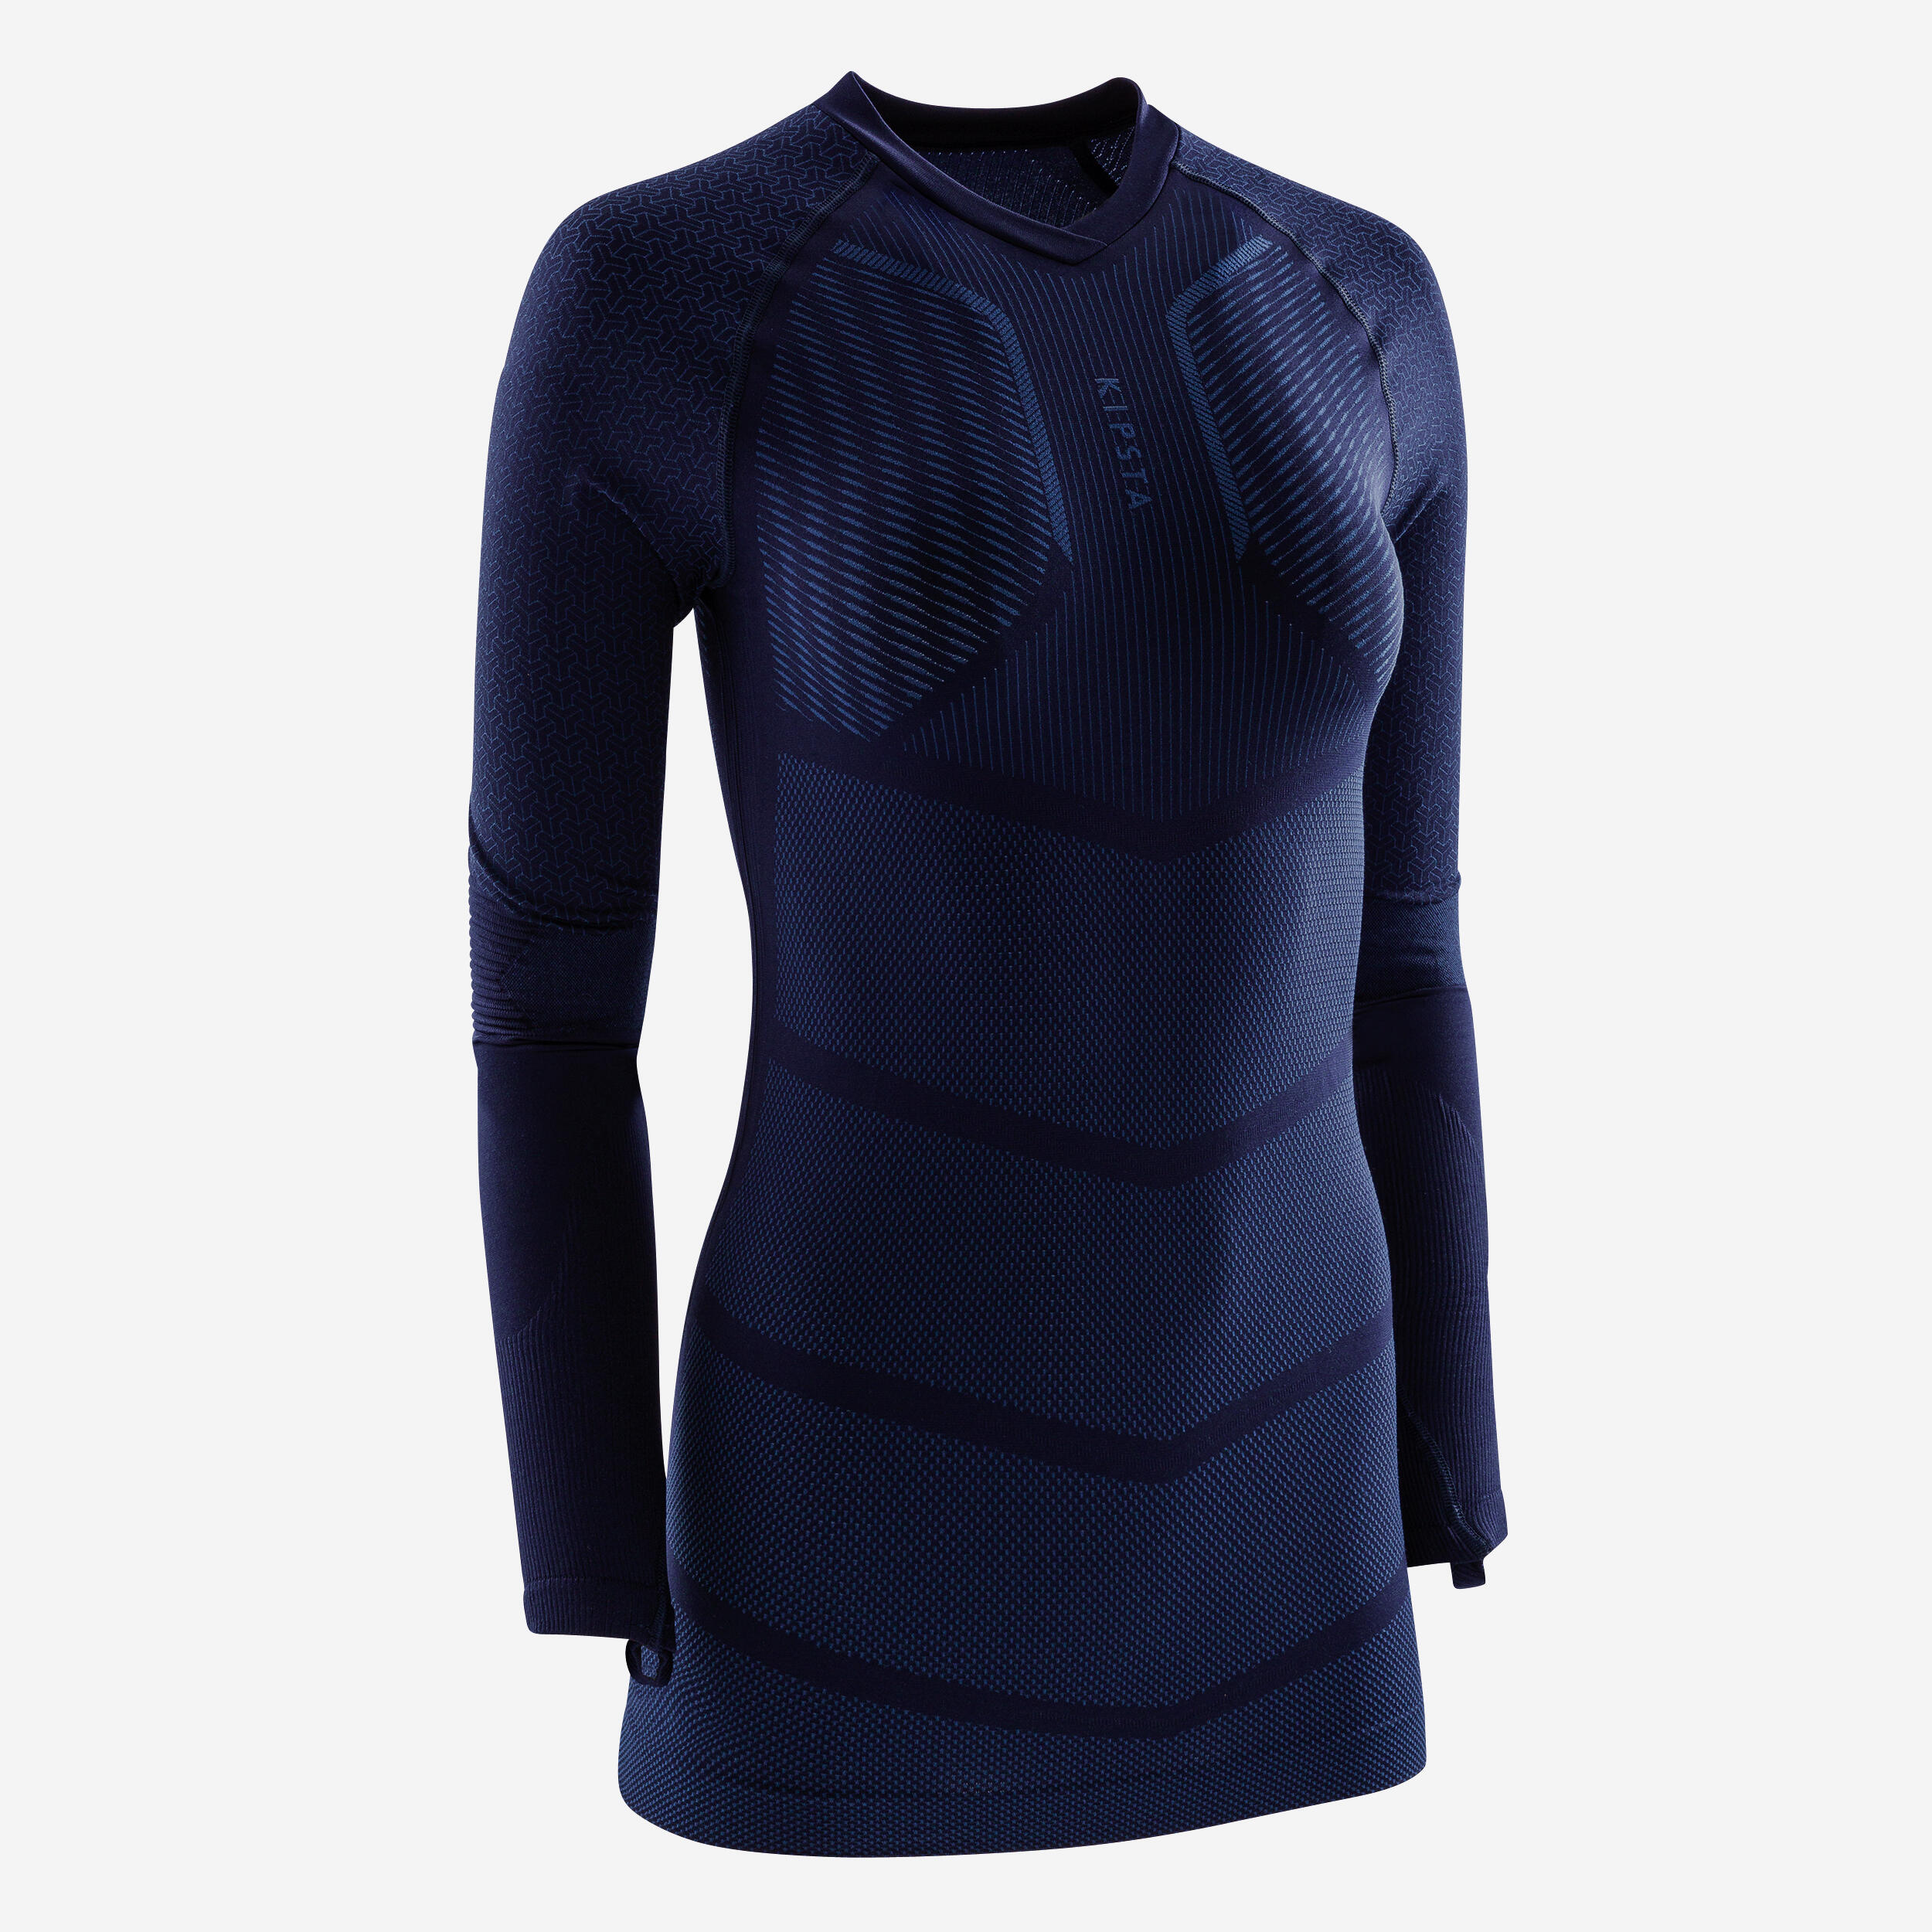 Adult Long-Sleeved Thermal Base Layer Top Keepdry 500 - Navy Blue 2/14